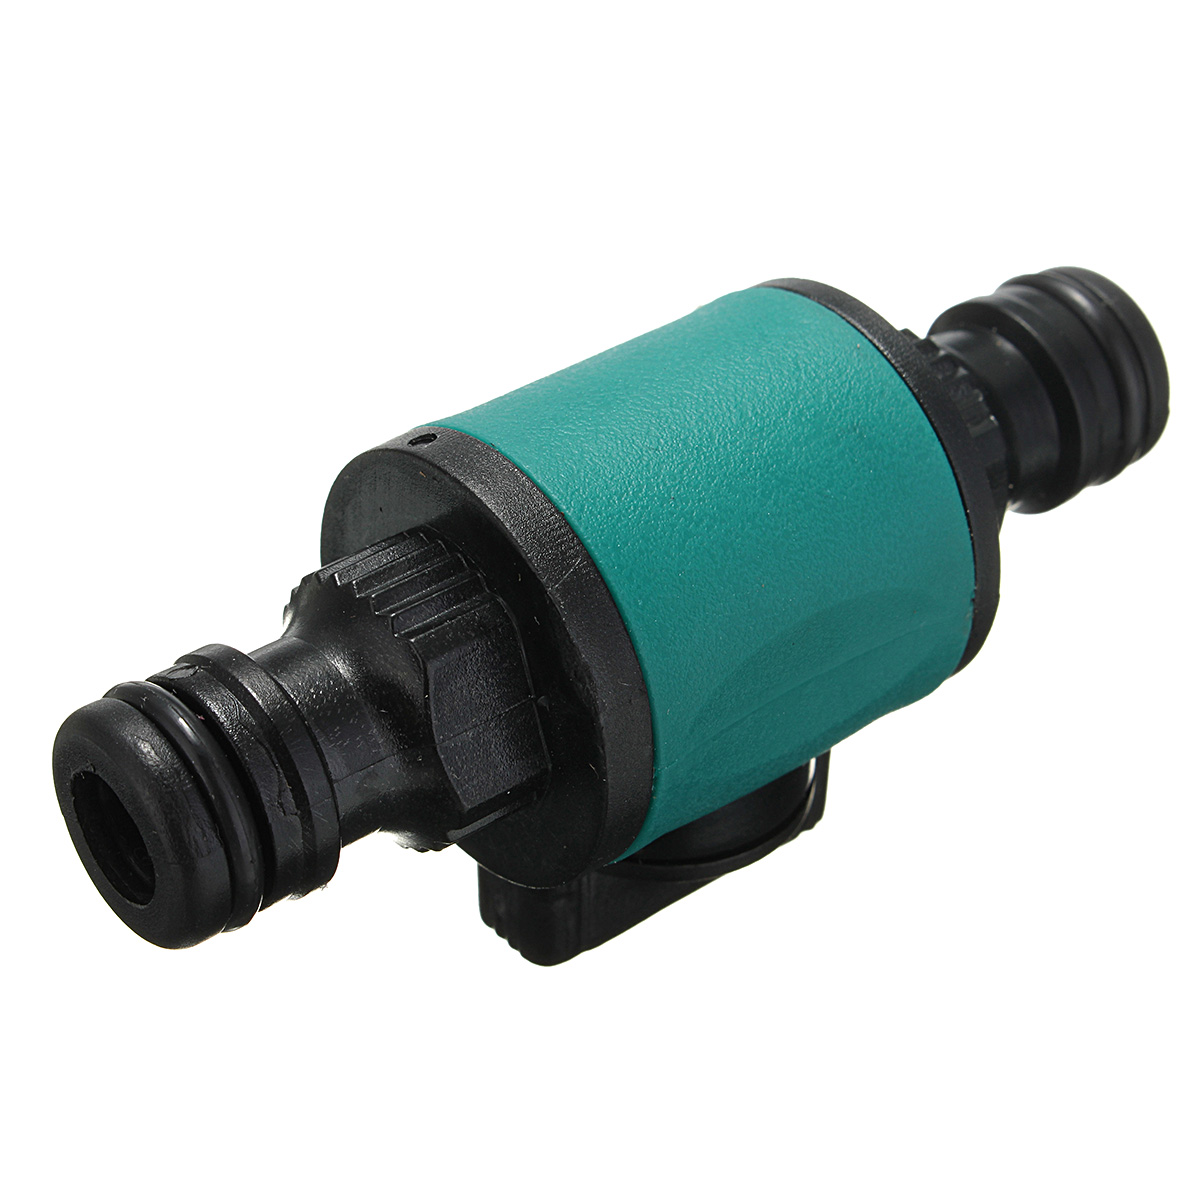 Garden-Hose-Tap-Pipe-Compatible-12-2-Way-Connector-Valve-Convertor-Fitting-Adapter-Tool-1290232